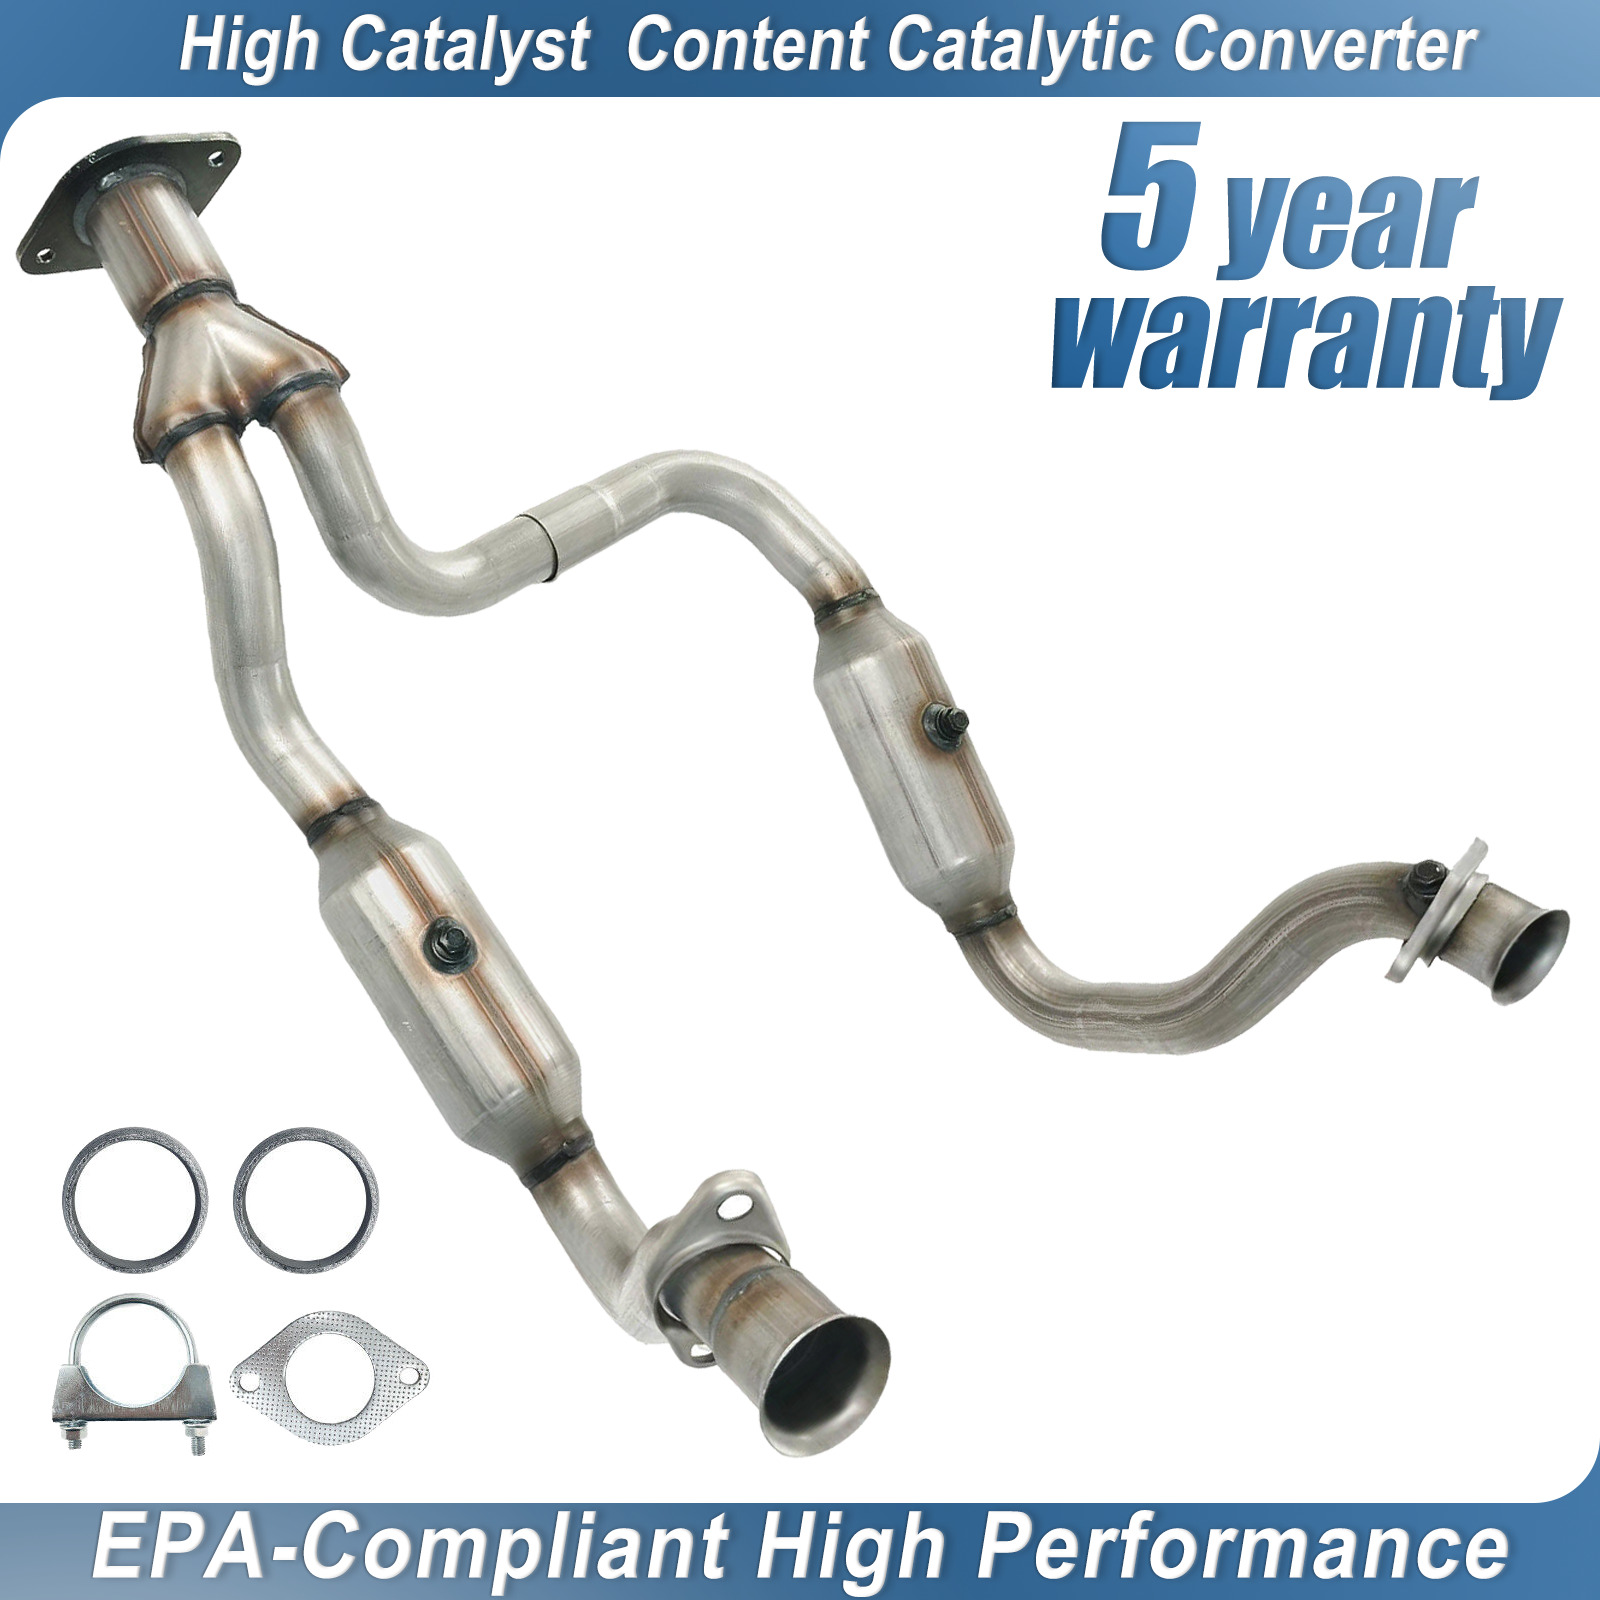 FOR FORD F-250 F-350 F-450 5.4L 2008 TO 2010 BOTH SIDES Catalytic Converters